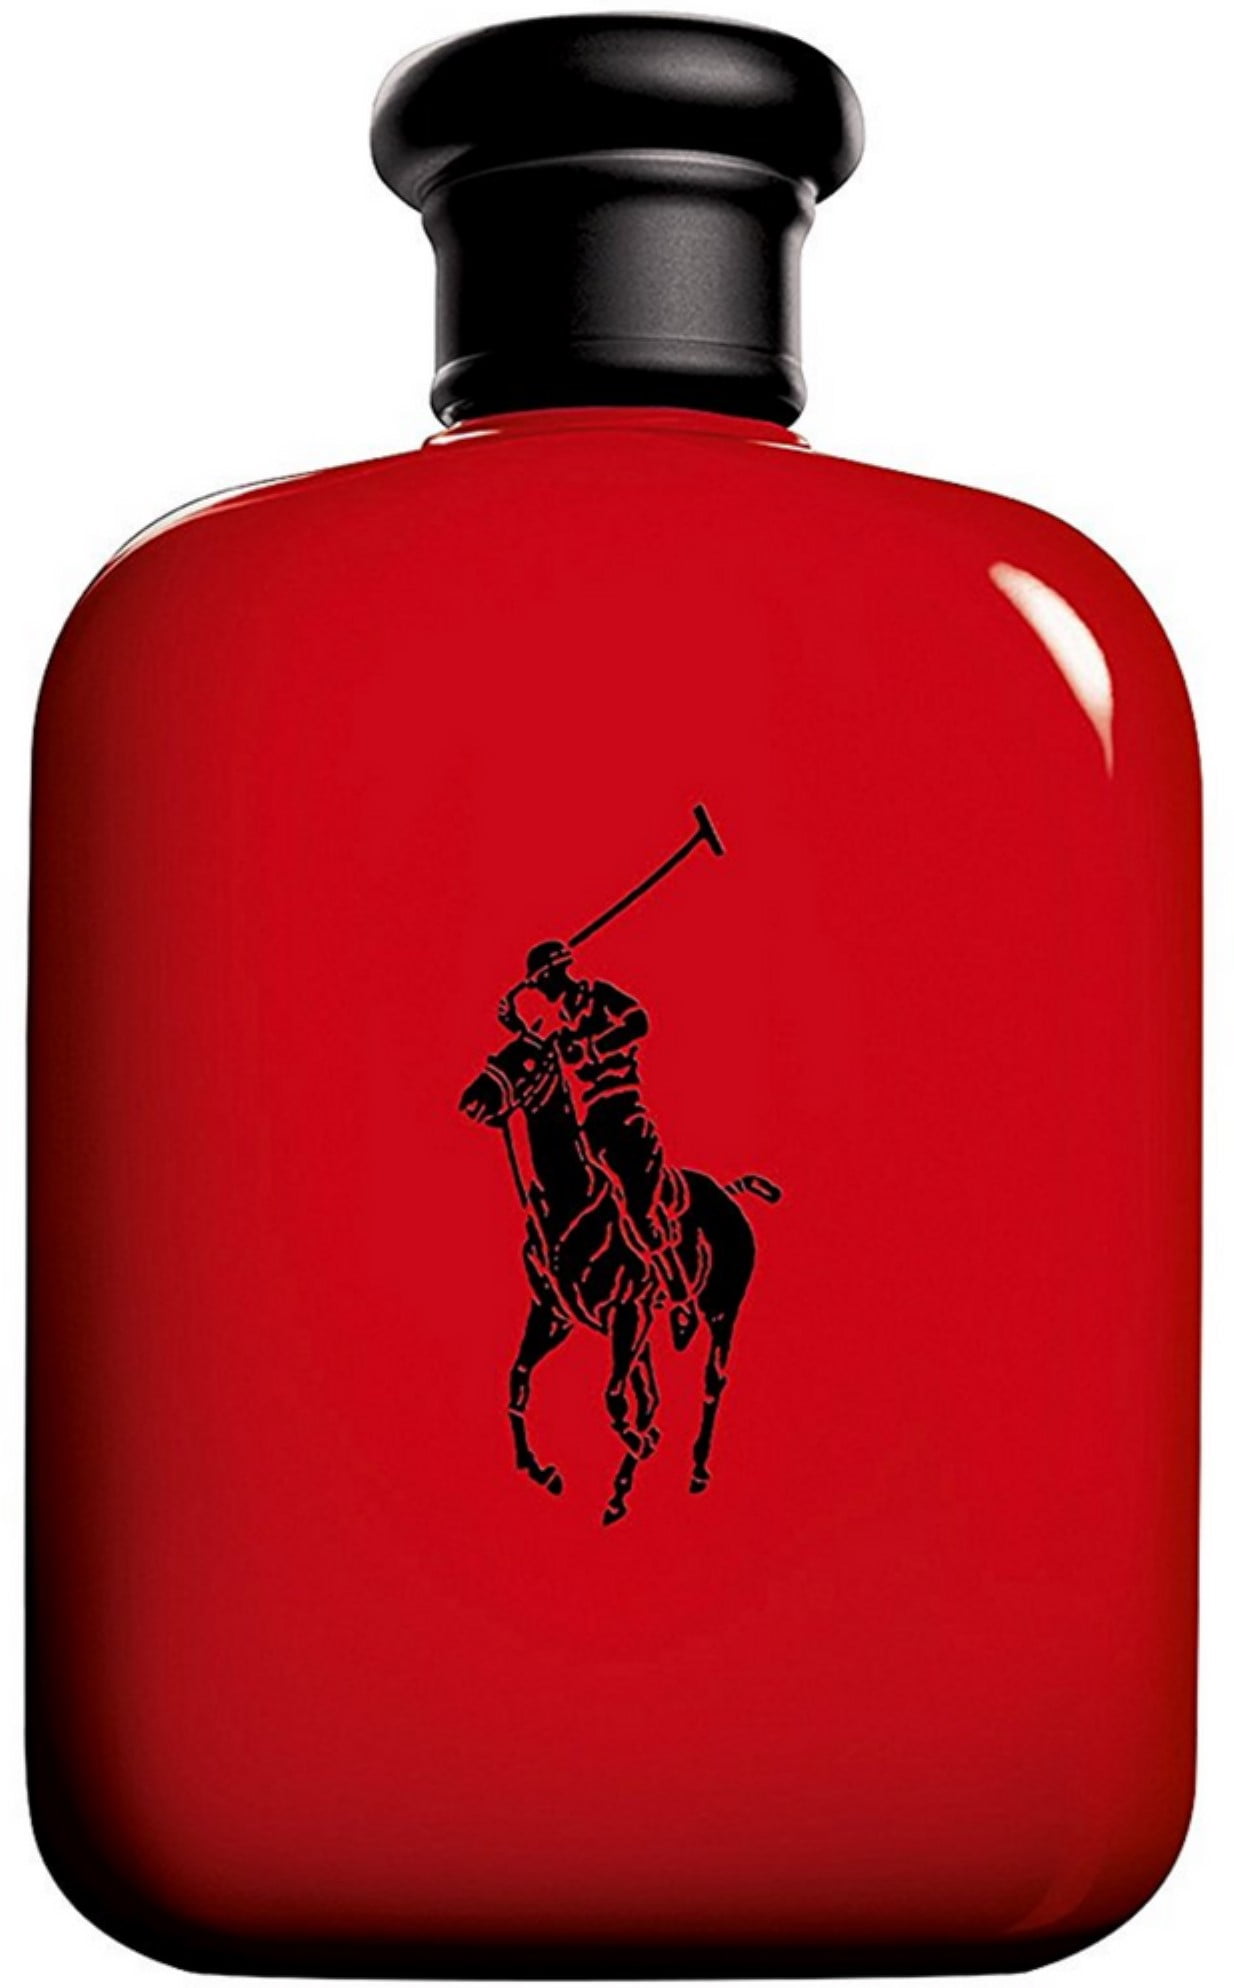 red polo parfum